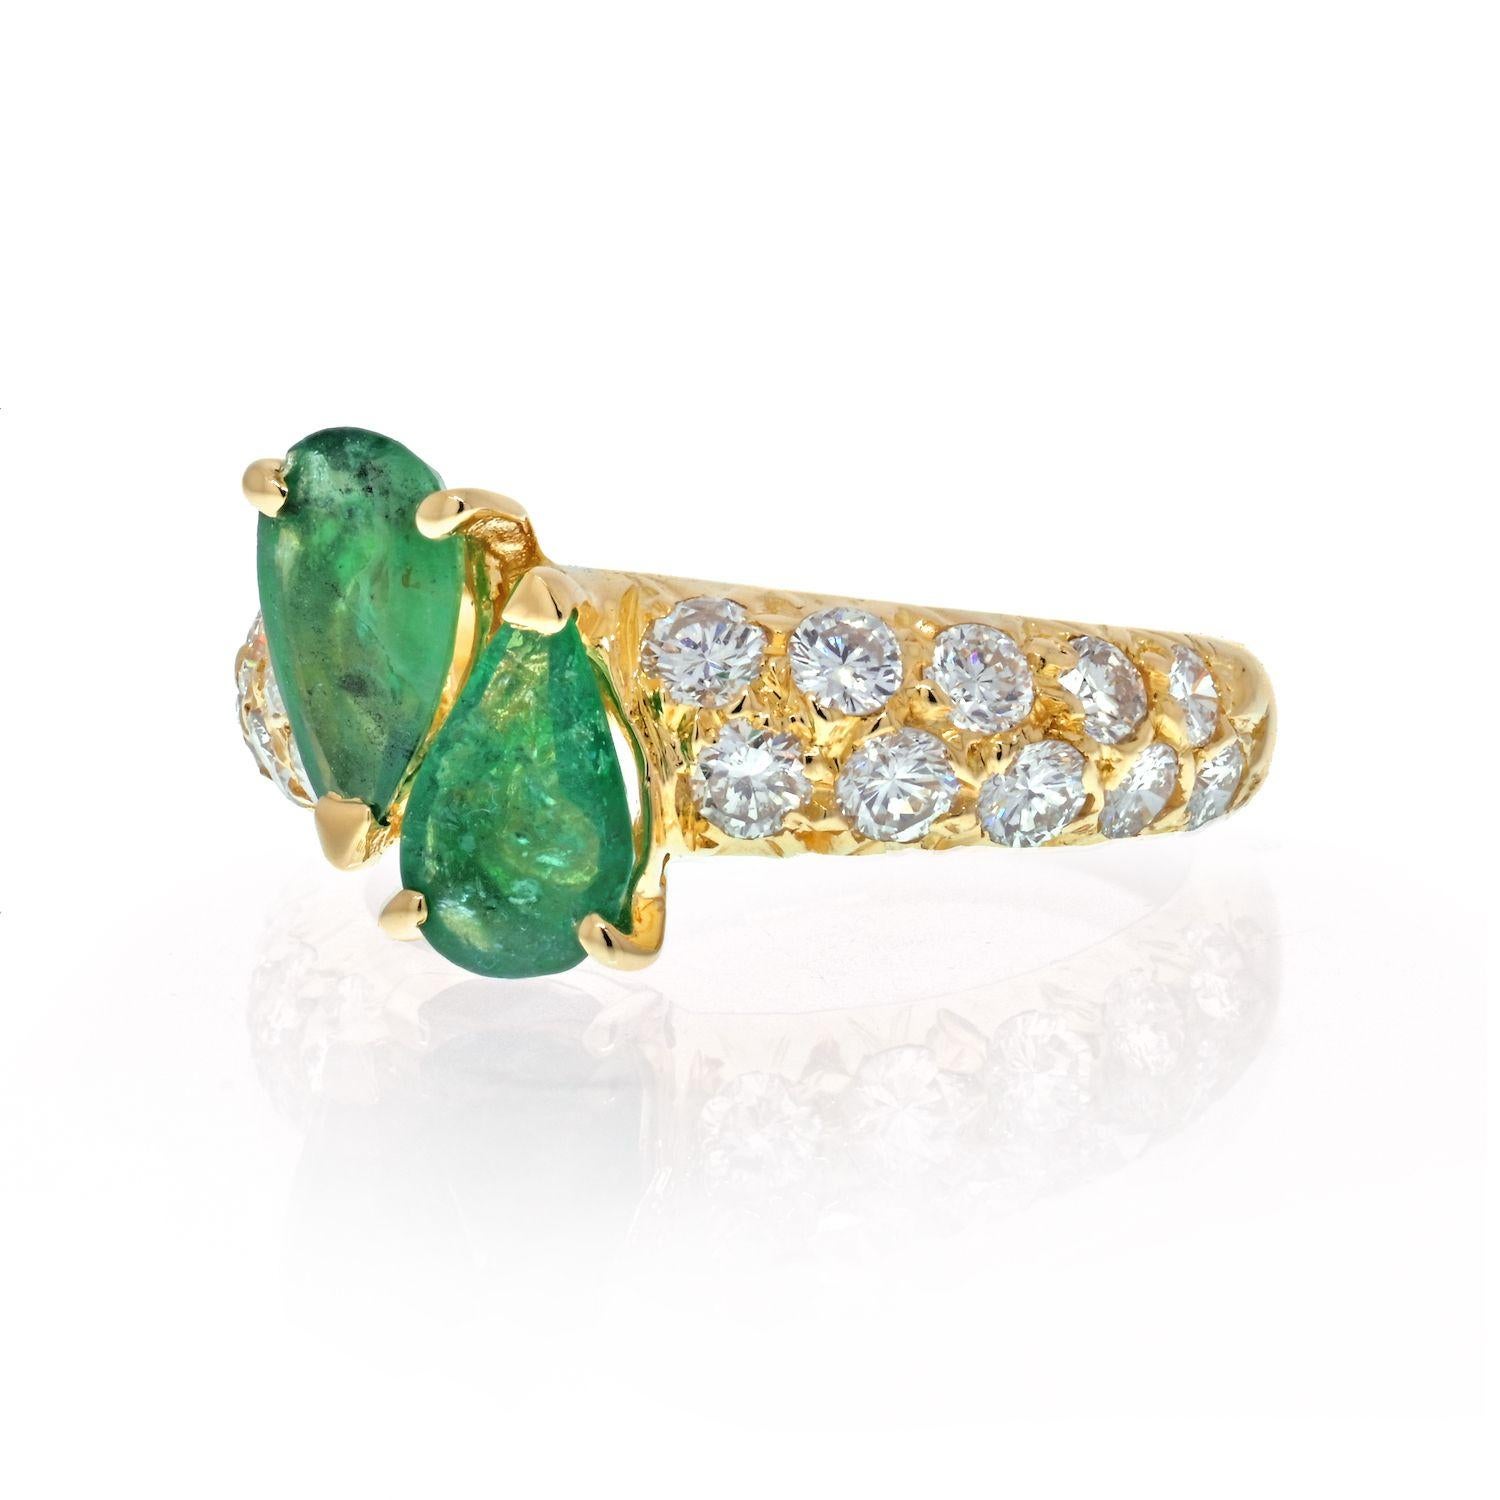 Vintage Van Cleef and Arpels 18K yellow gold cross-over or toi et moi ring consisting of 2 pear shaped green emeralds weighing 3.00 carats in total. Can serve as a lovely promise or an engagement ring. 
This style of ring has been popular as an